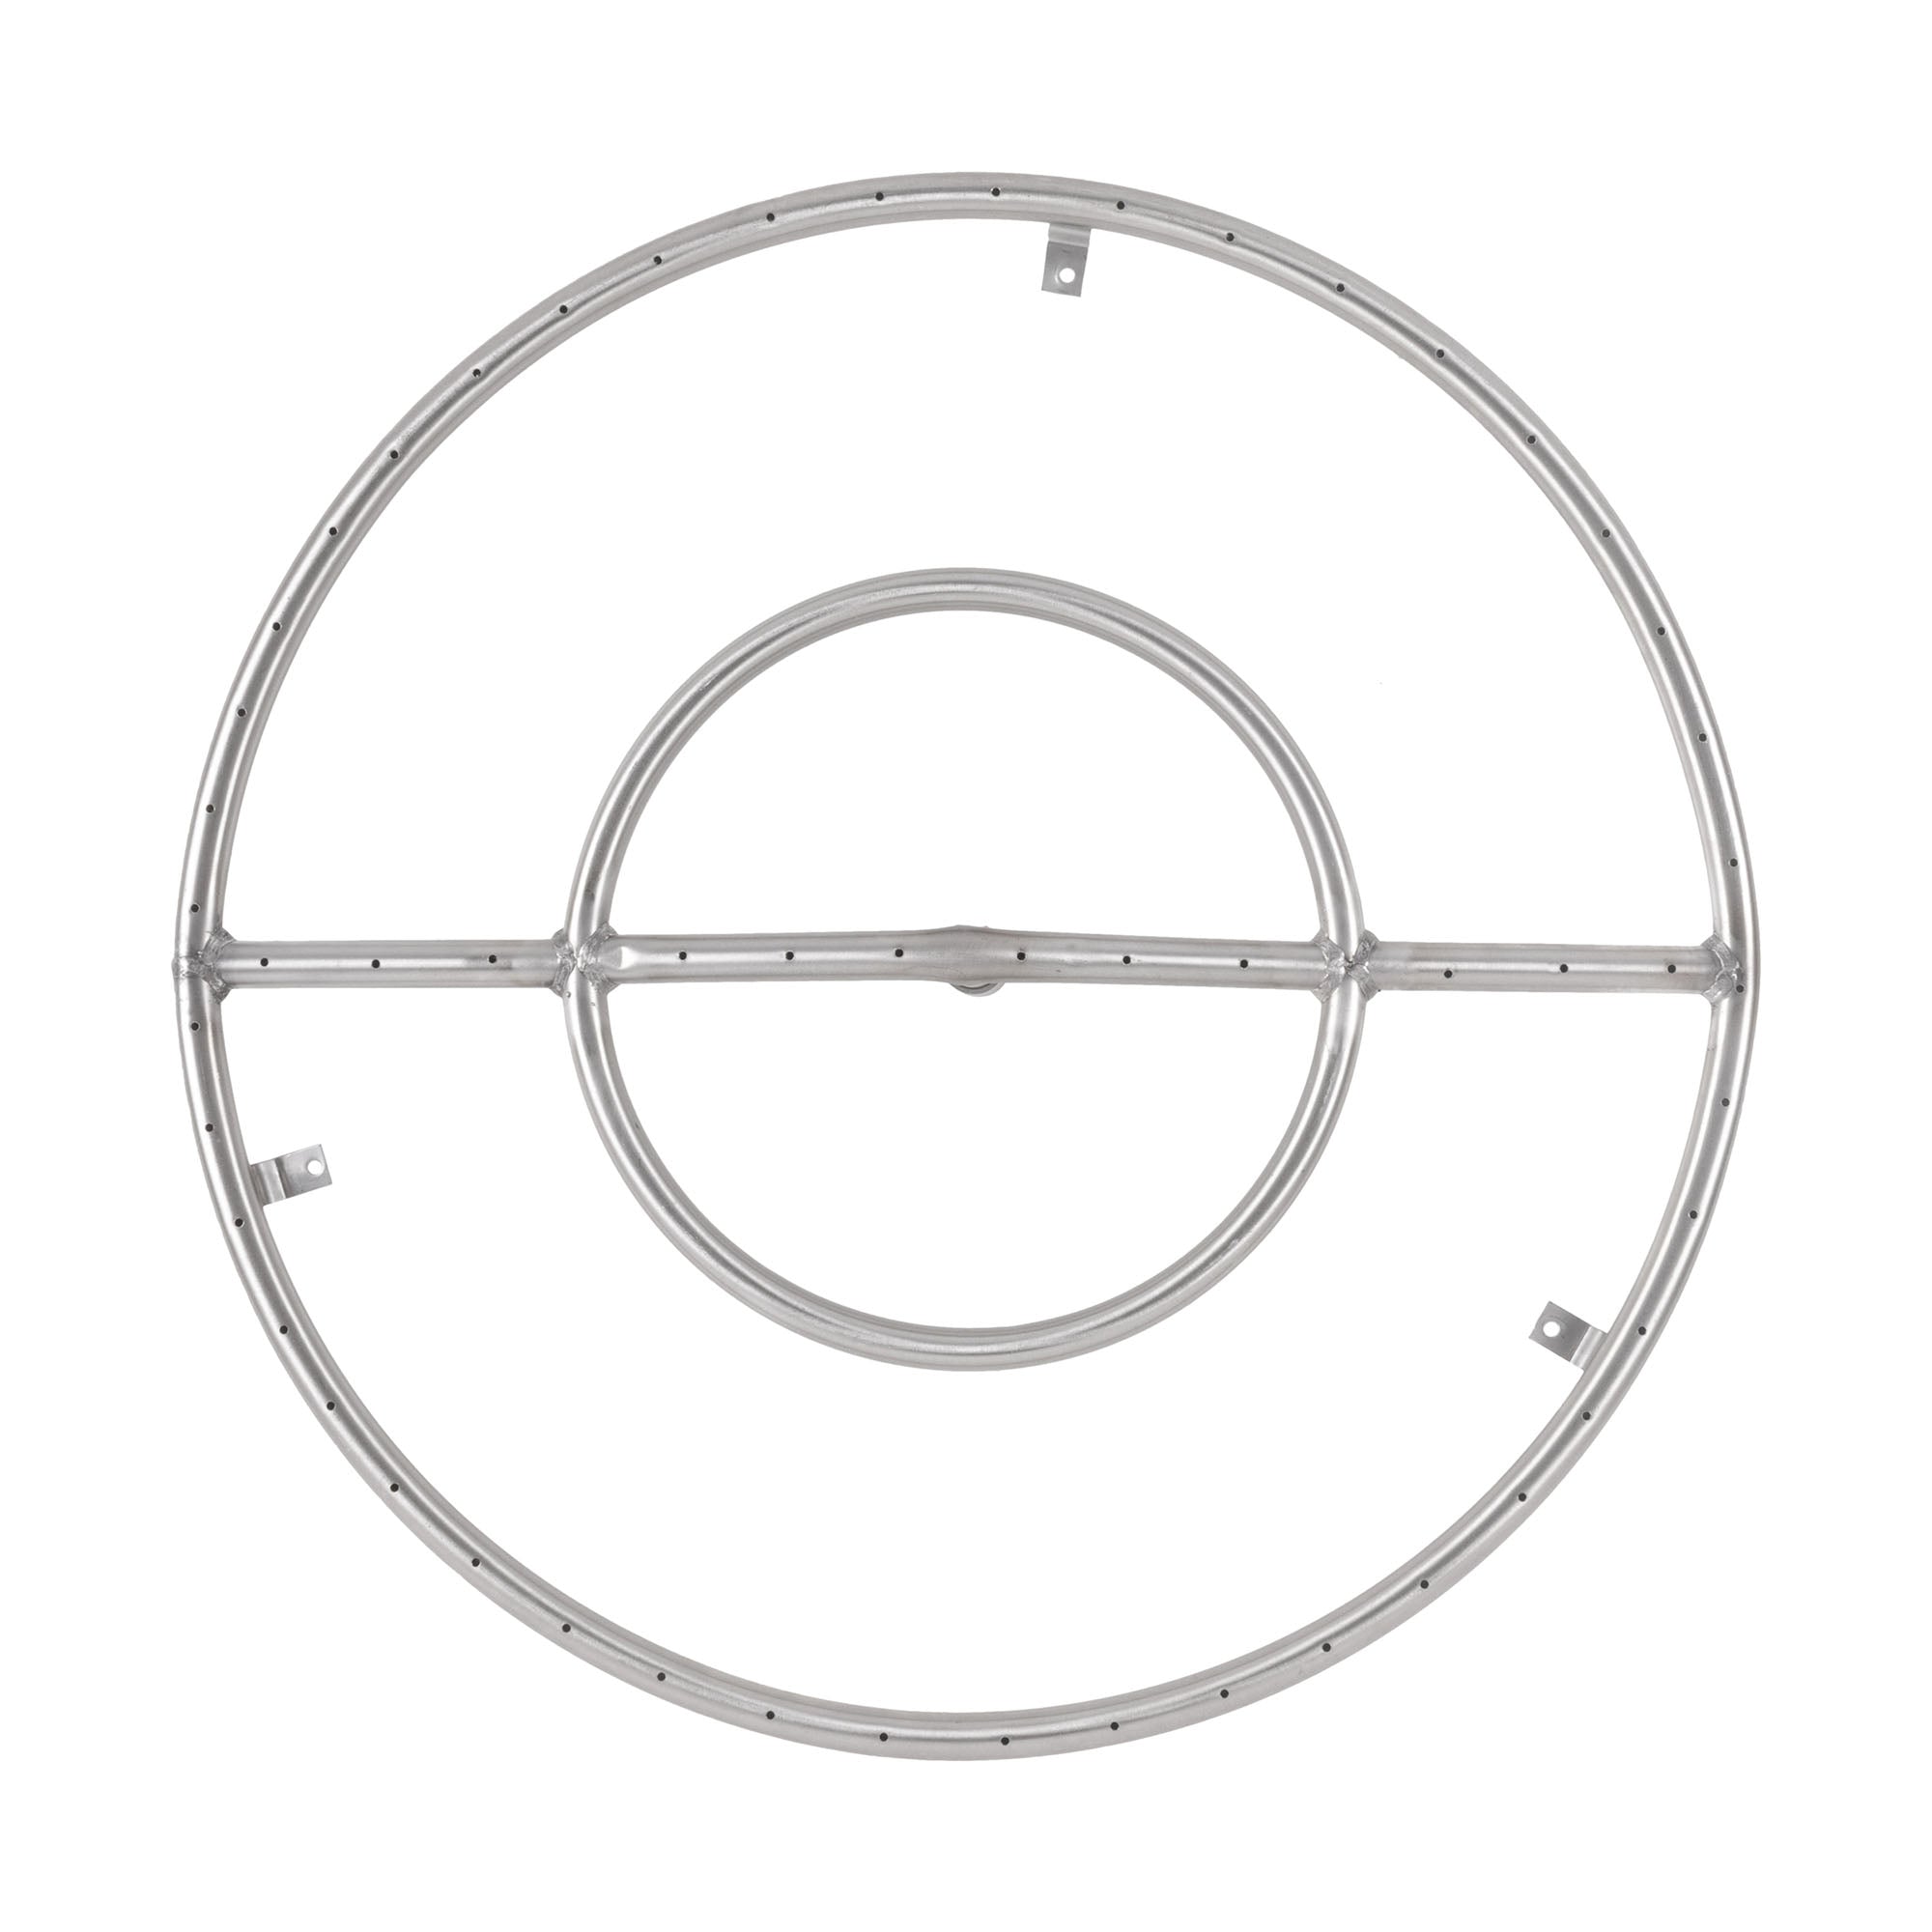 The Outdoor Plus - 8" Round Stainless Steel Burner - OPT-158-8